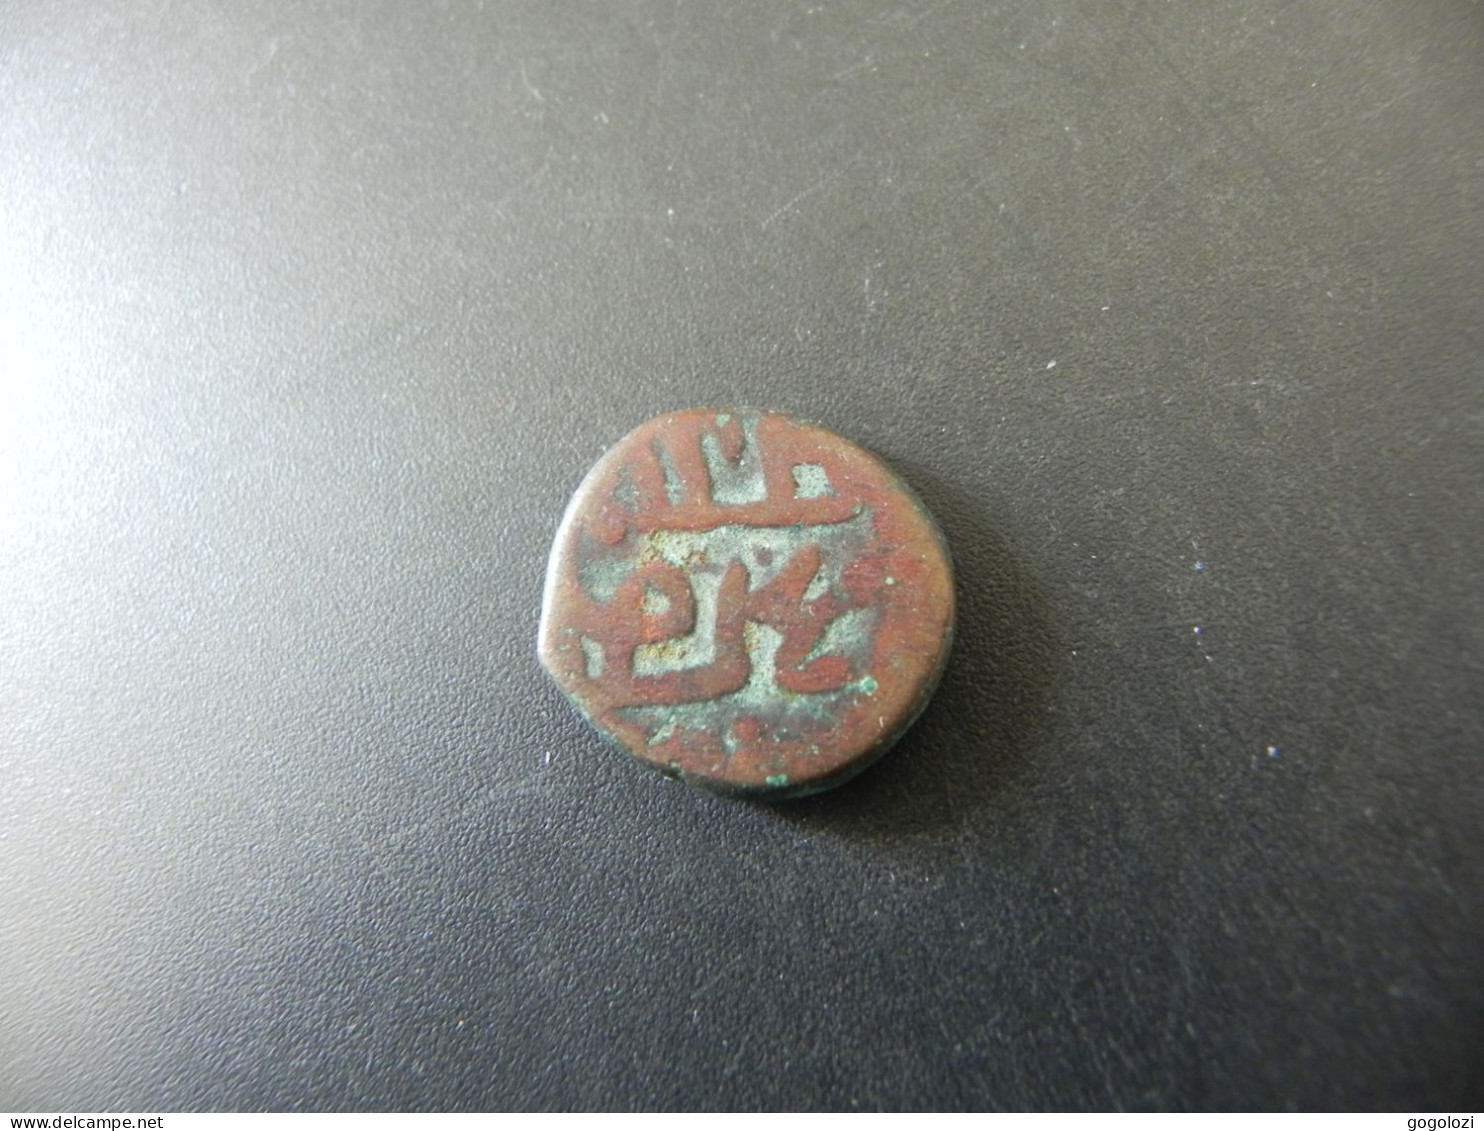 Old Oriental Coin - Ottoman Empire - To Be Identified - Orientales